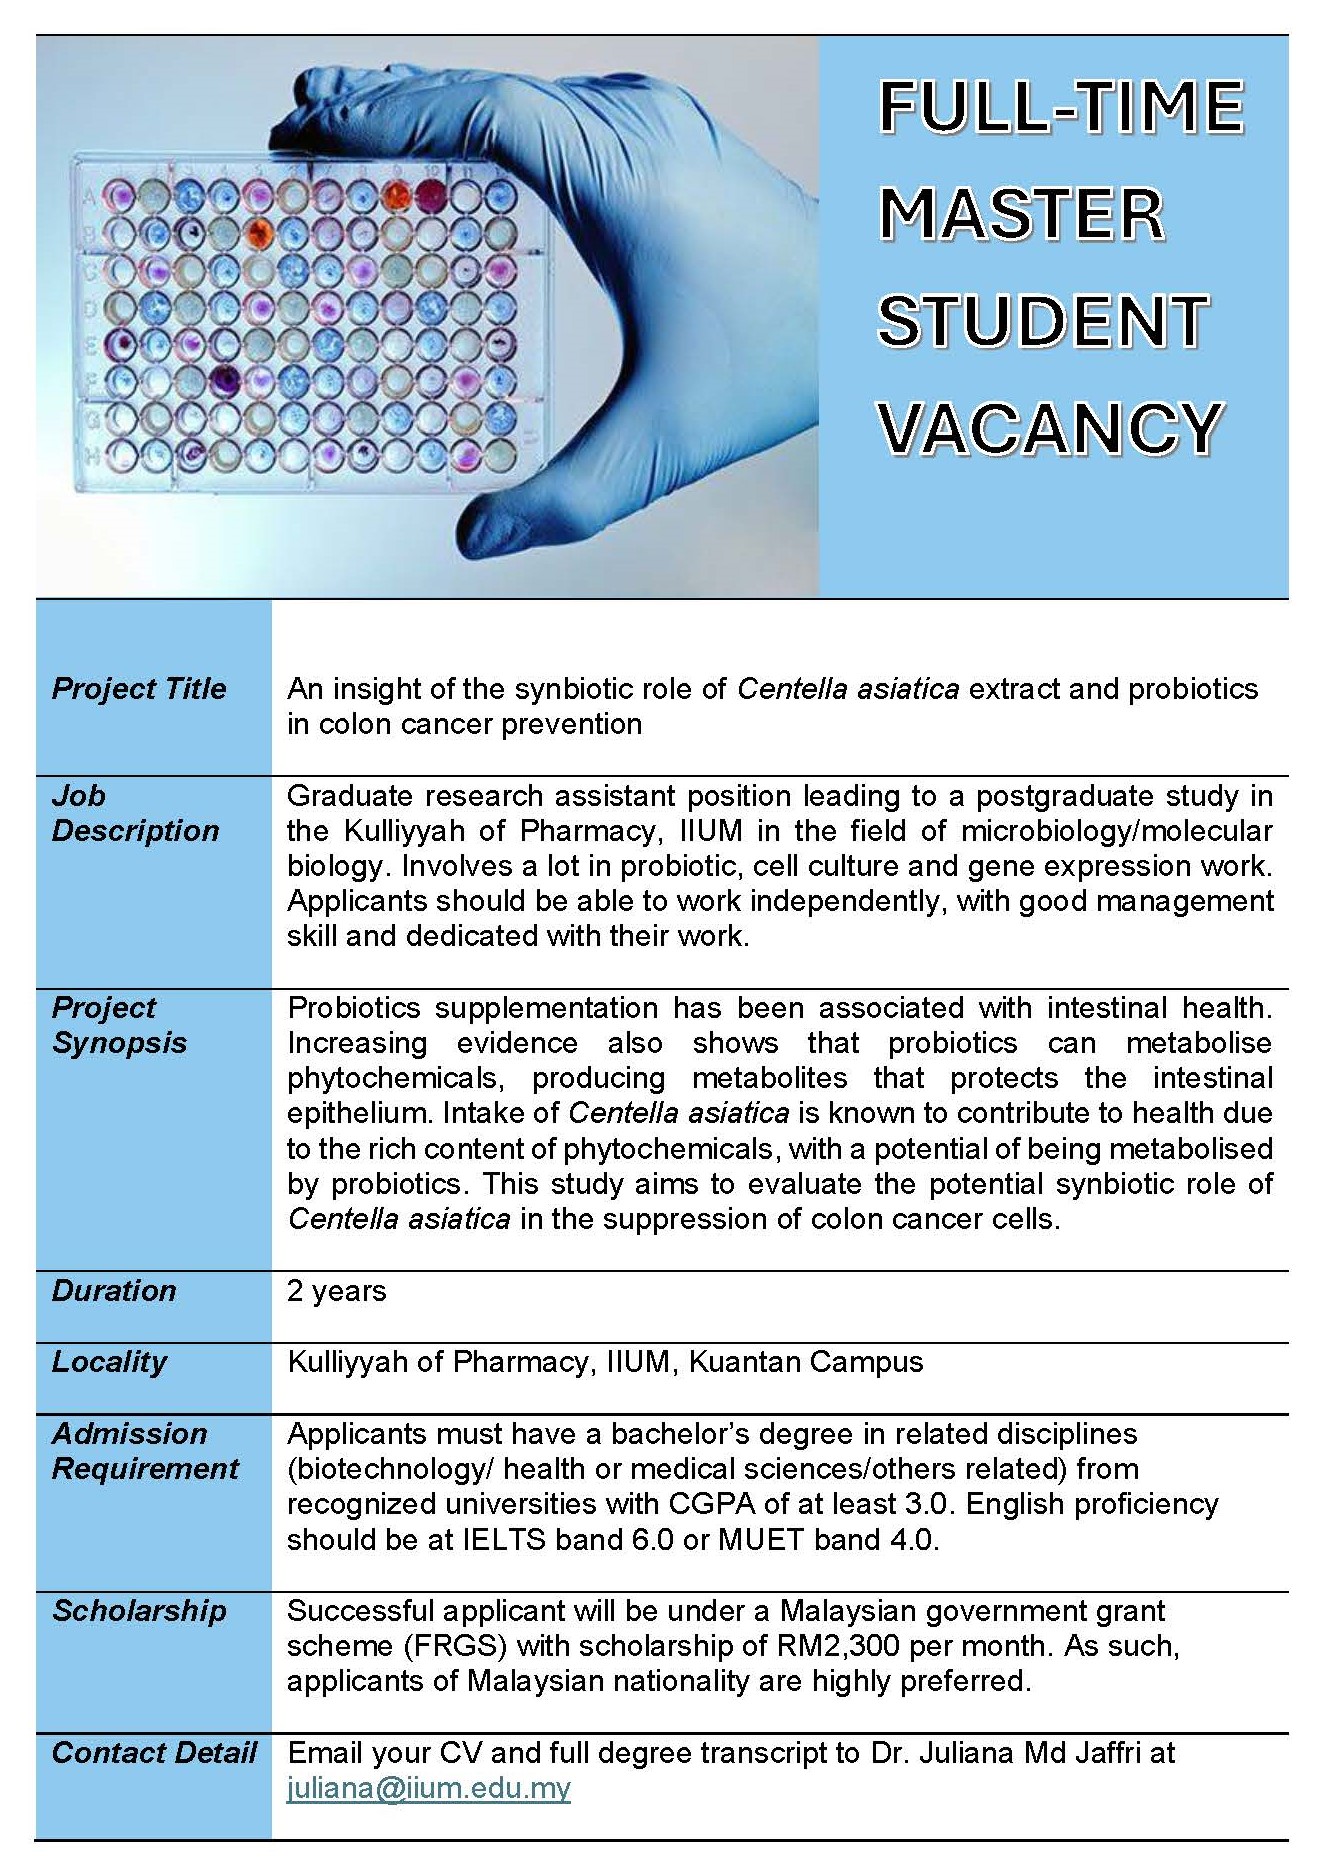 Full-Time Master Student Vacancy